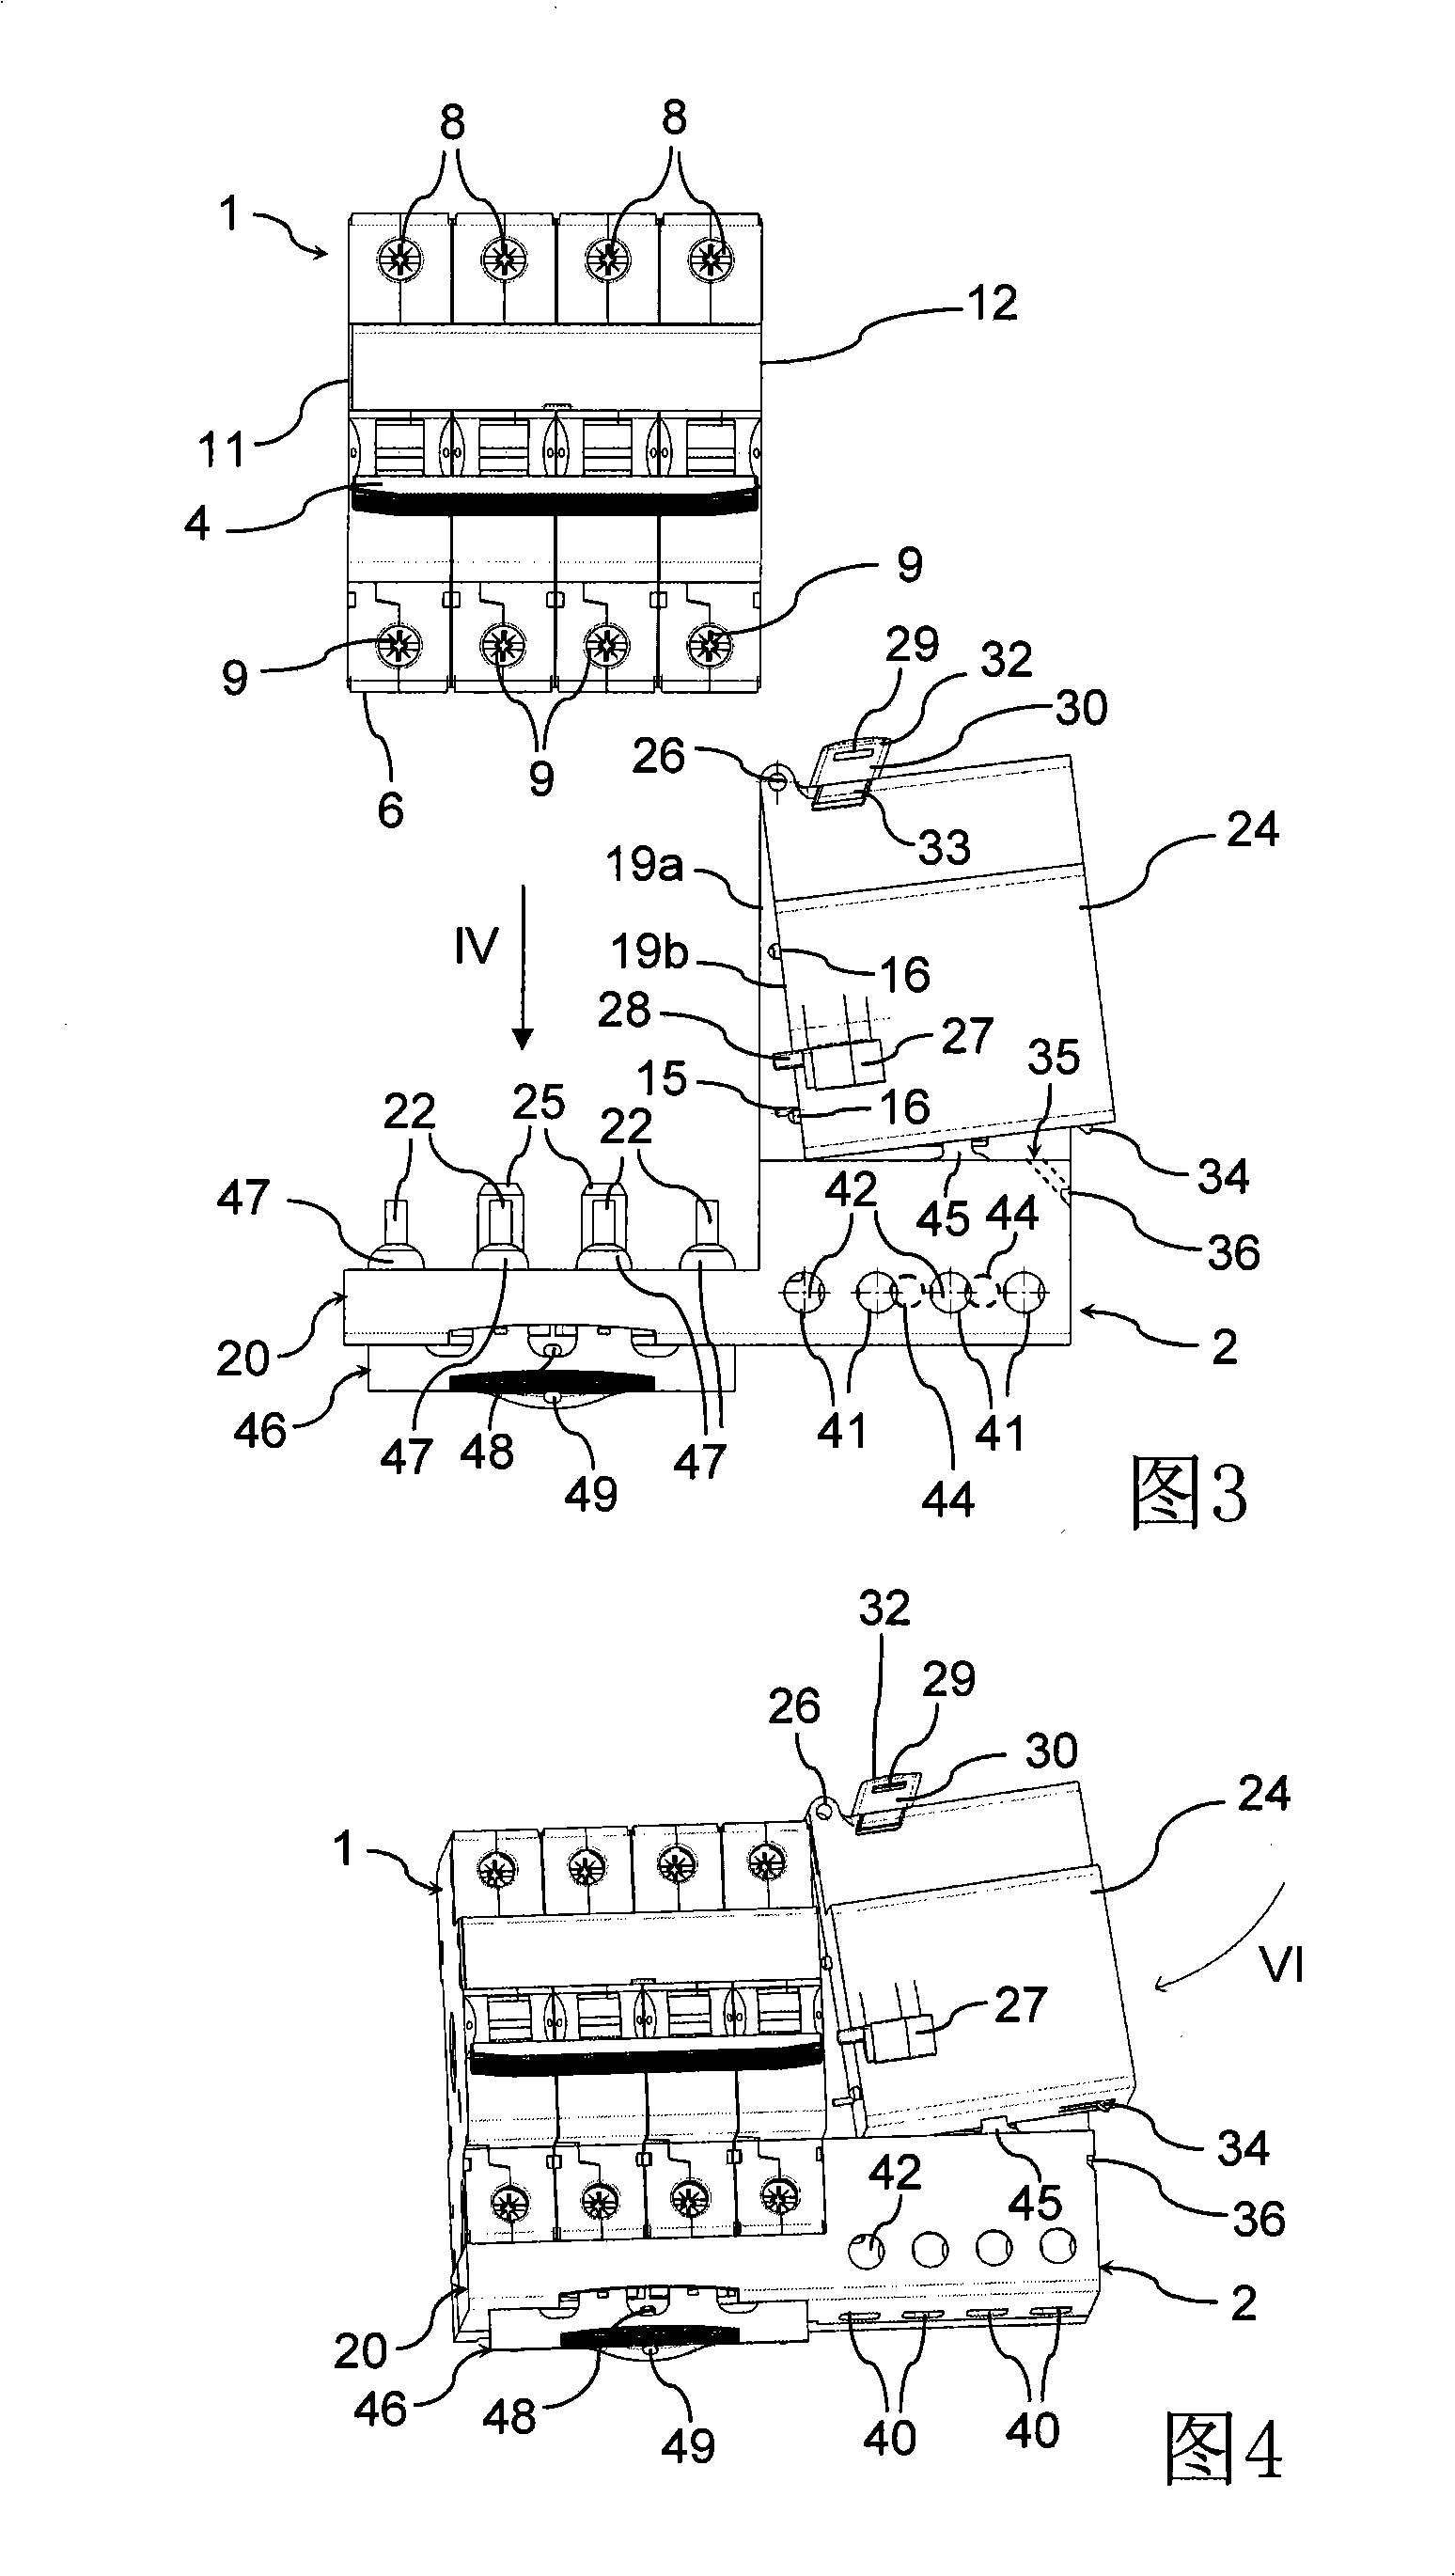 Residual current device for an electric circuit breaker